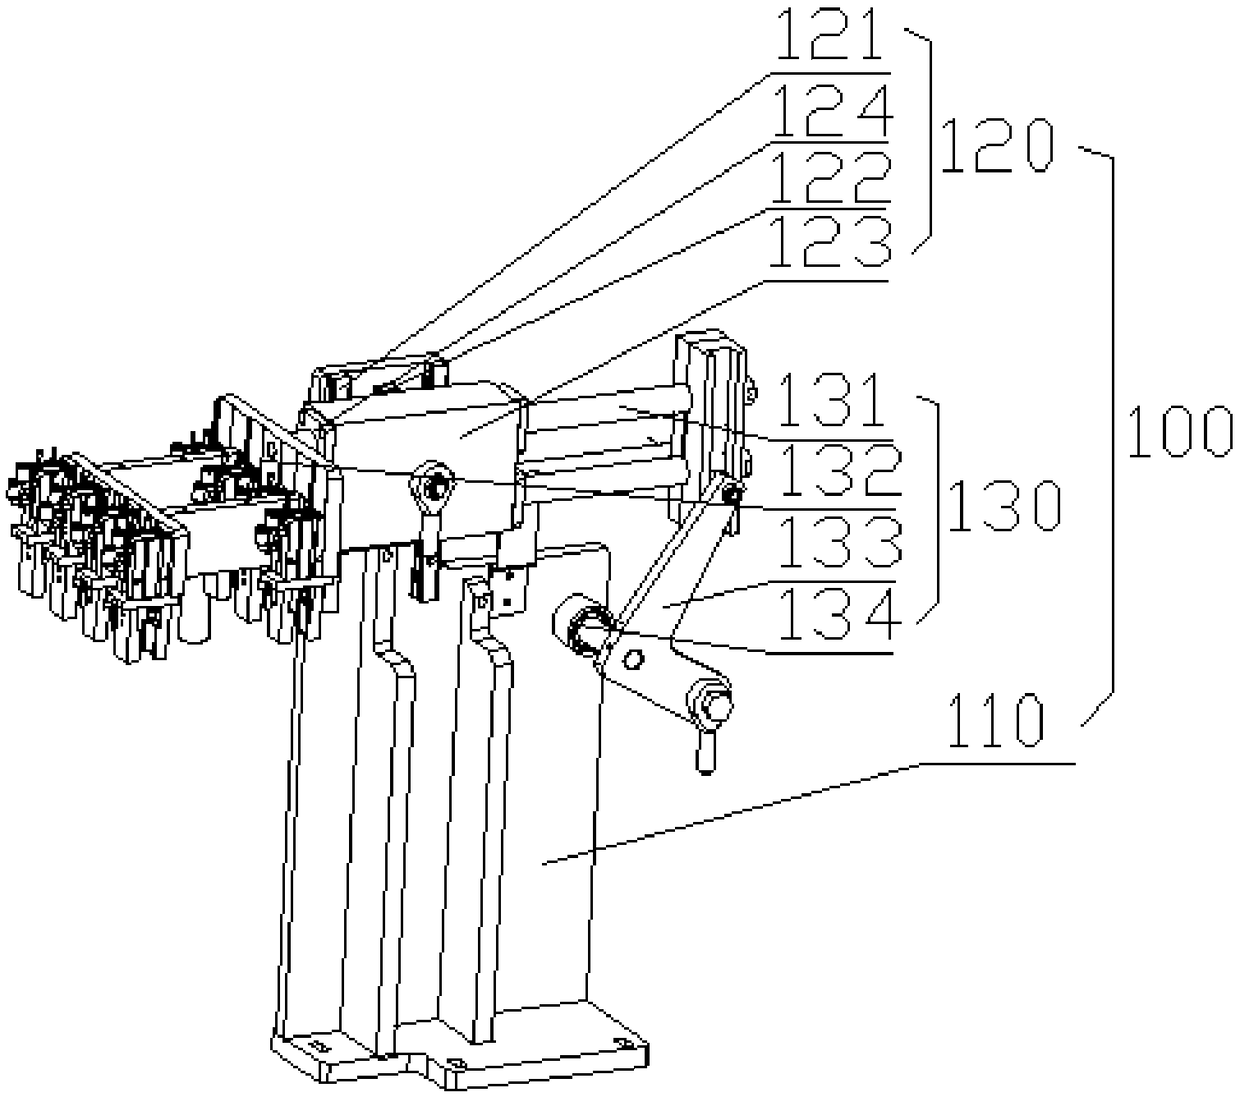 Cam-lever-type automatic feeding device